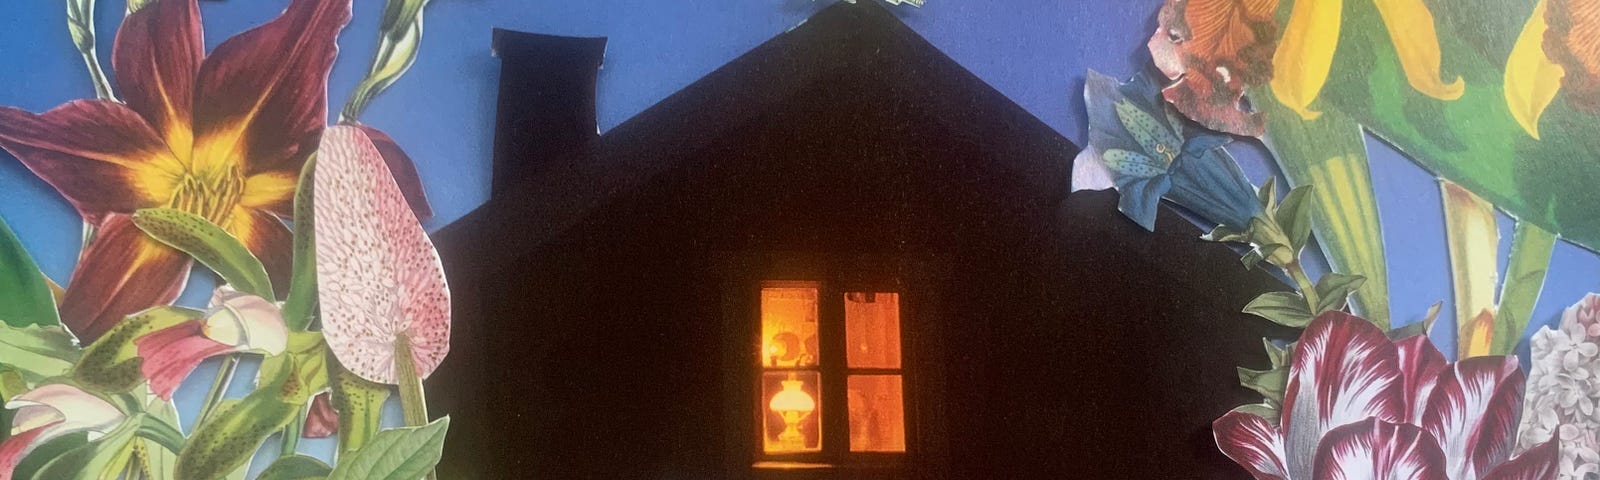 The silhouette of a house with a chimney and a chicken resting on the peak of the roof is set against a twilit sky. An oil lamp in a window glows a warm orange, while all around the house, a colorful garden of vintage botanical drawings make a riot of color.